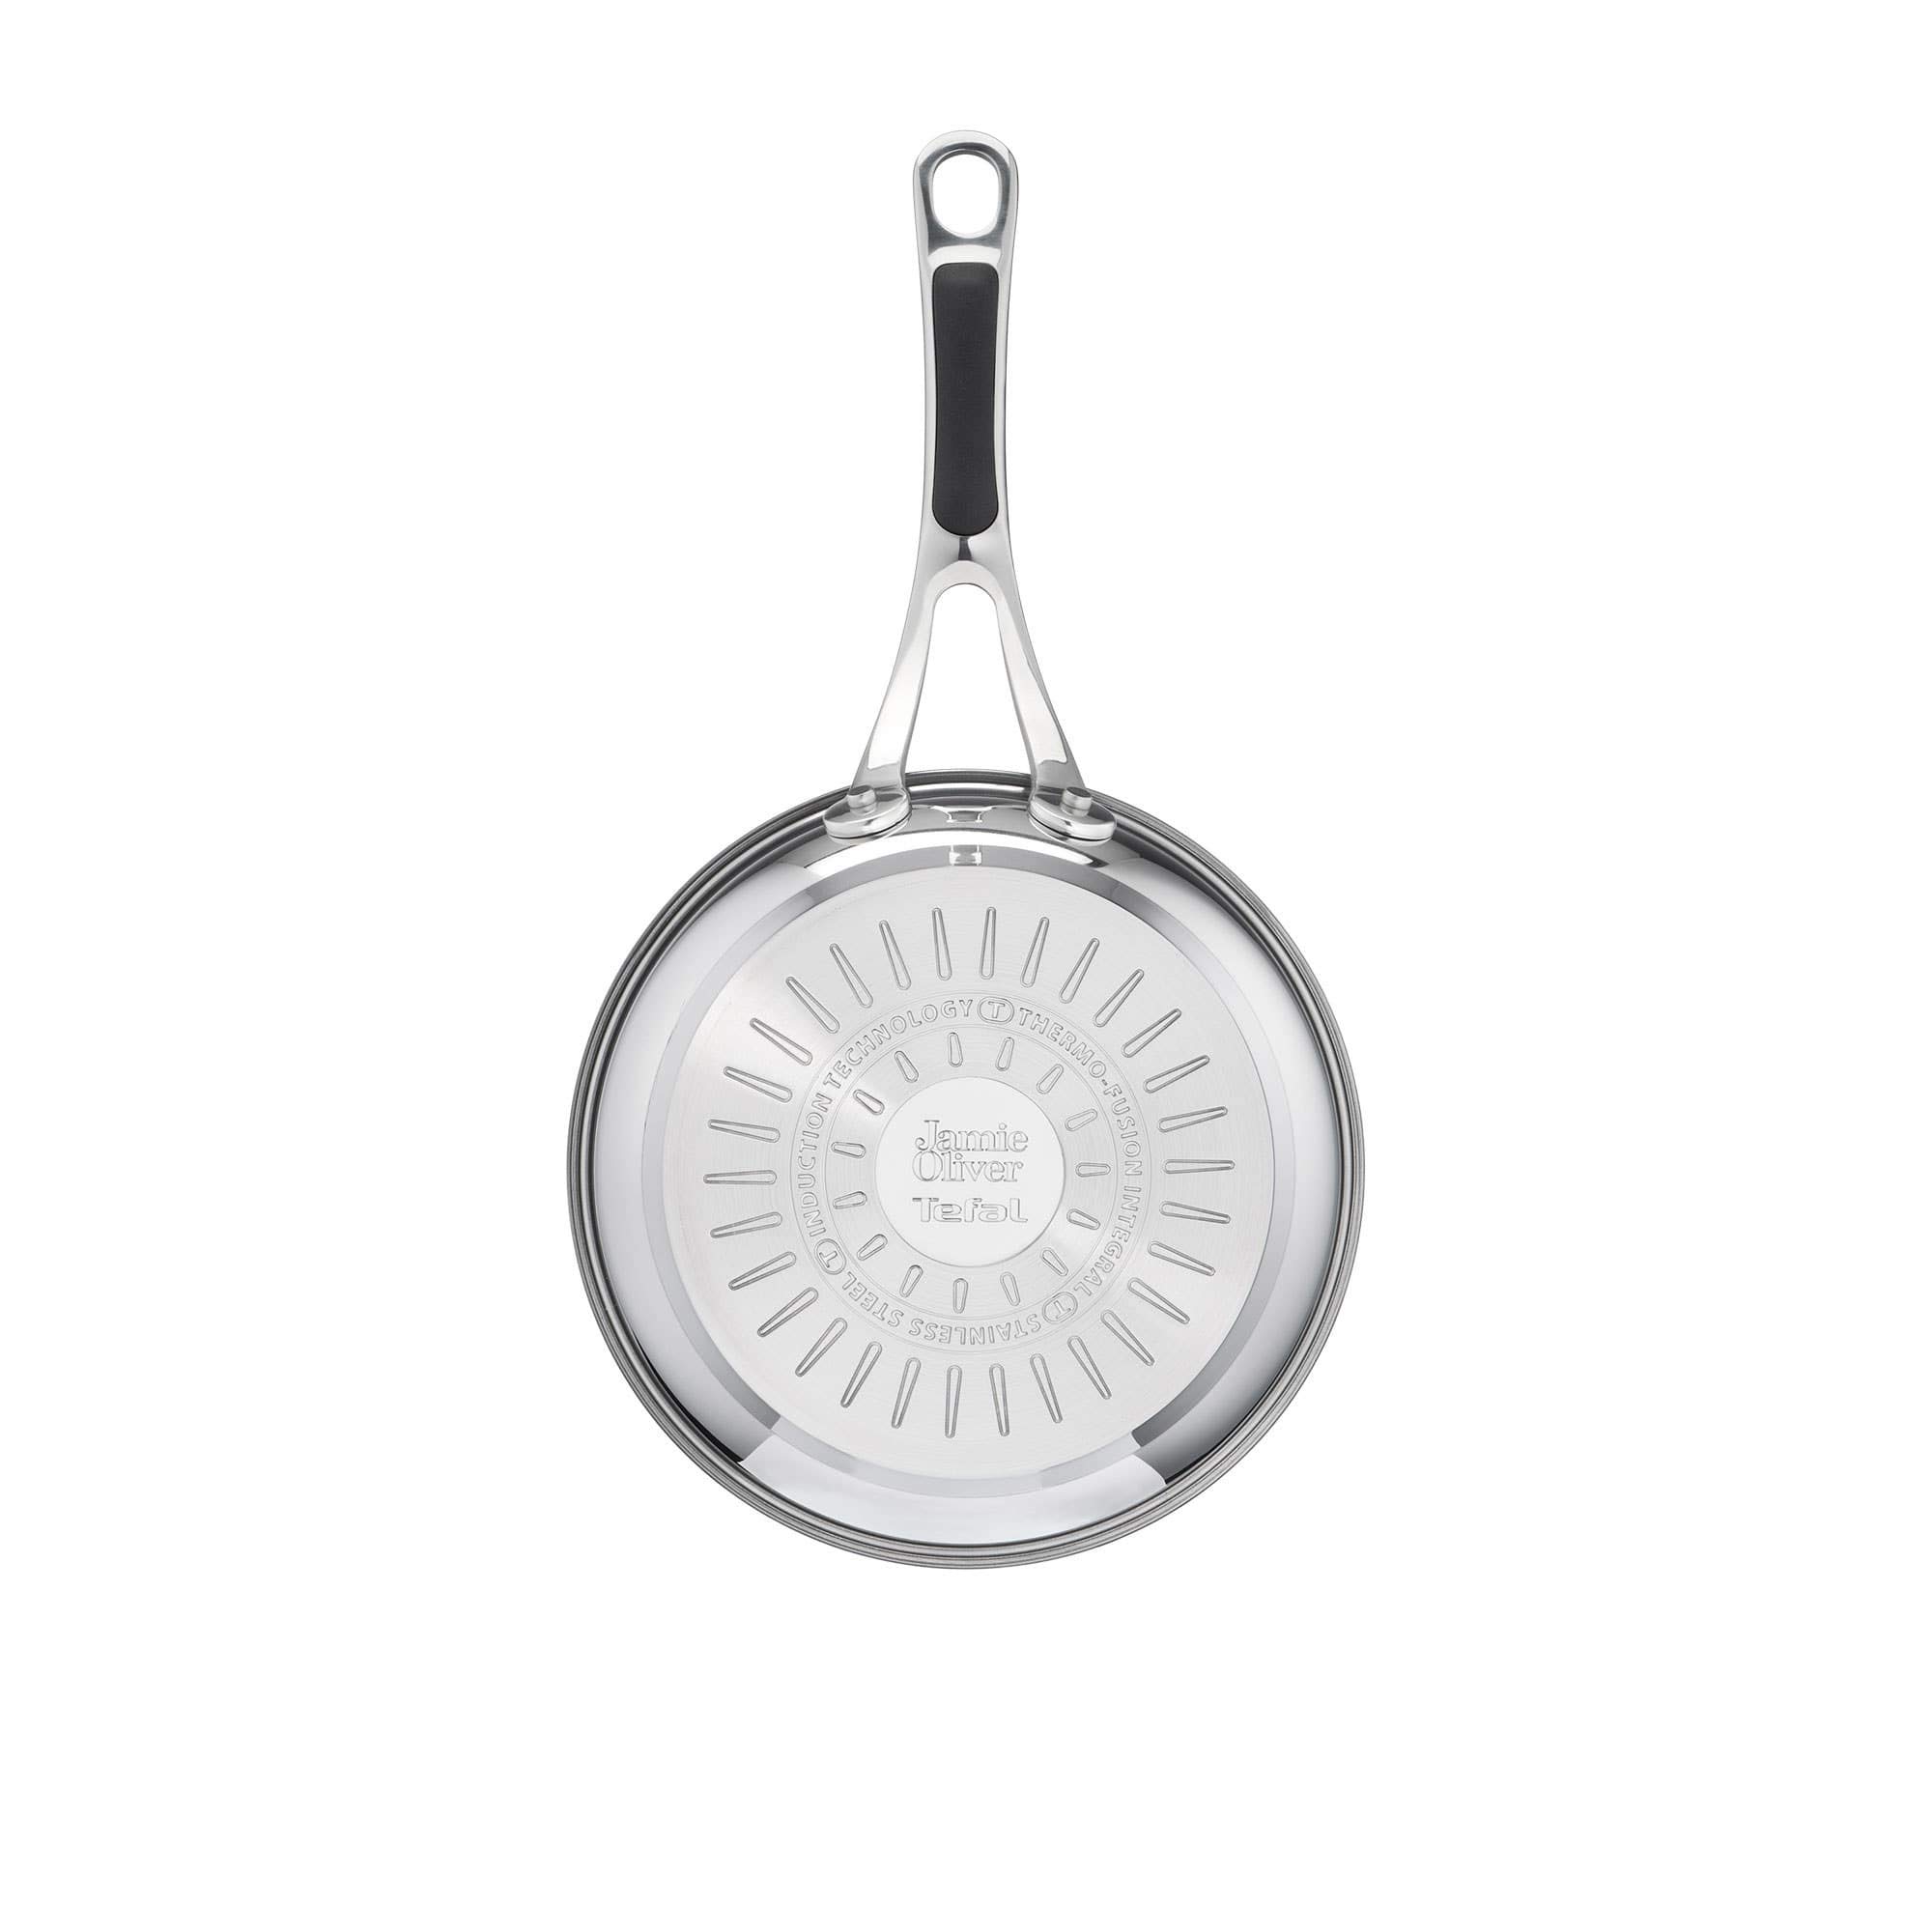 Tefal E3060734 Frying Pan, 30cm, Jamie Oliver, Stainless Steel